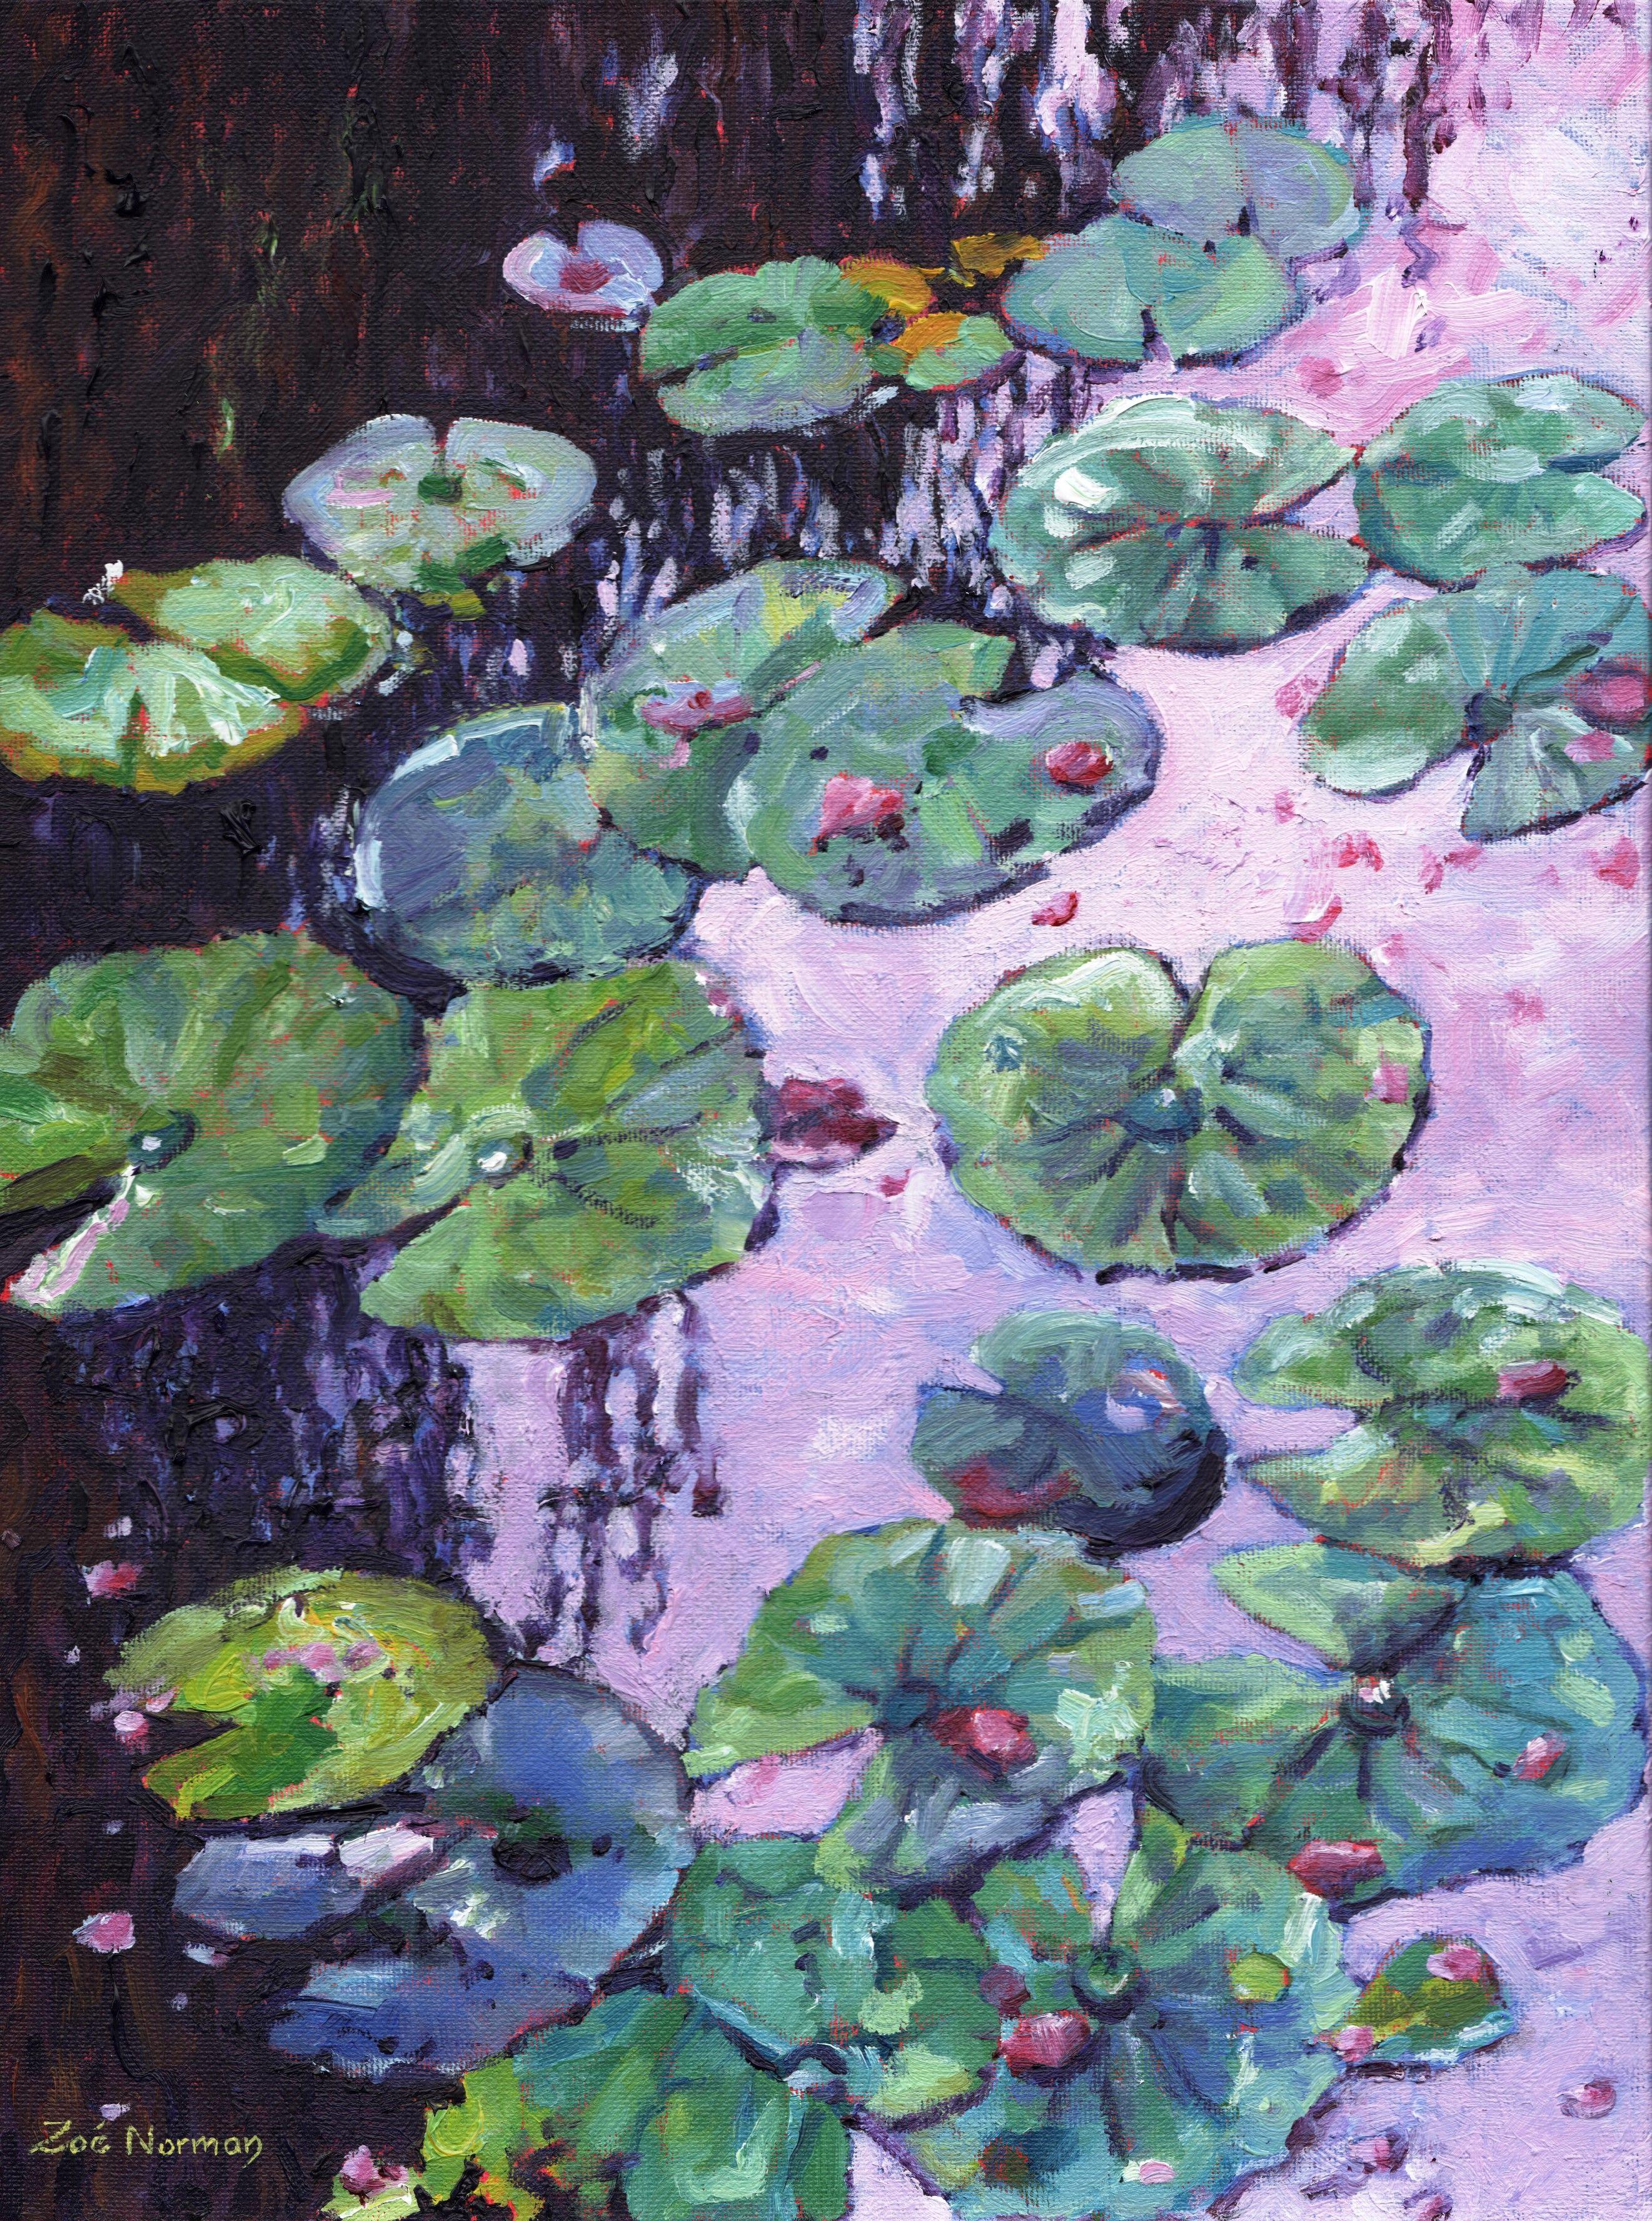 Contemporary Impressionism. A play of light, colour and texture loosely depicting water lily pads with fallen pink rose petals. Thickly applied paint and lively brush strokes. Signed on the front, varnished and accompanied by a certificate of